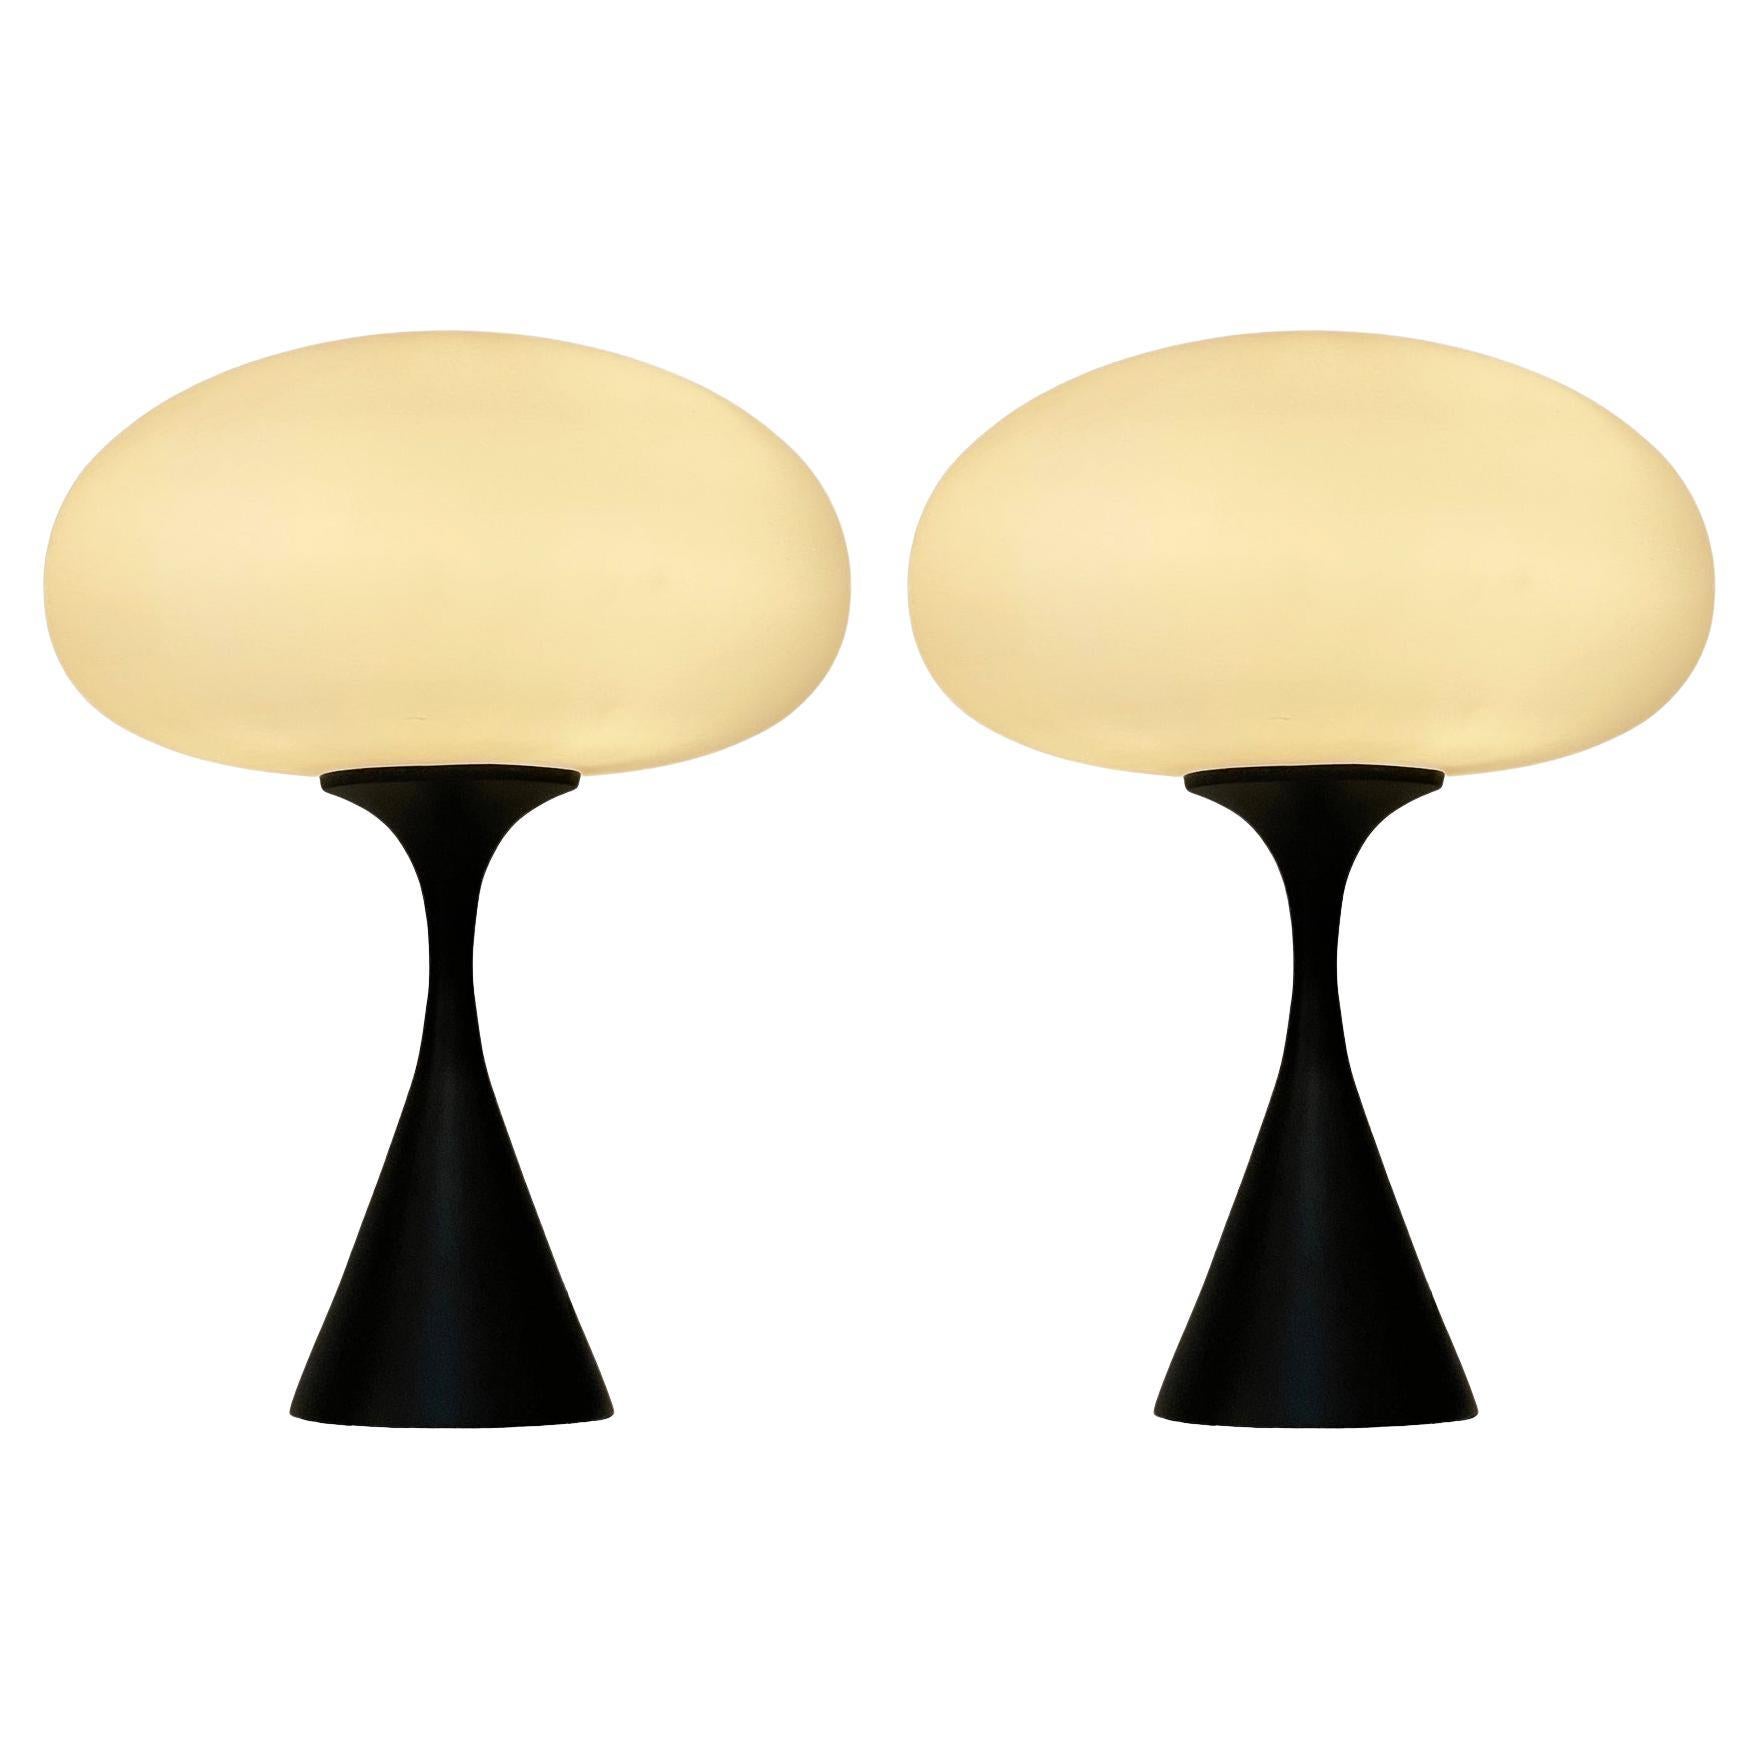 Pair of Mid-Century Modern Table Lamps by Designline in Black & White Glass For Sale